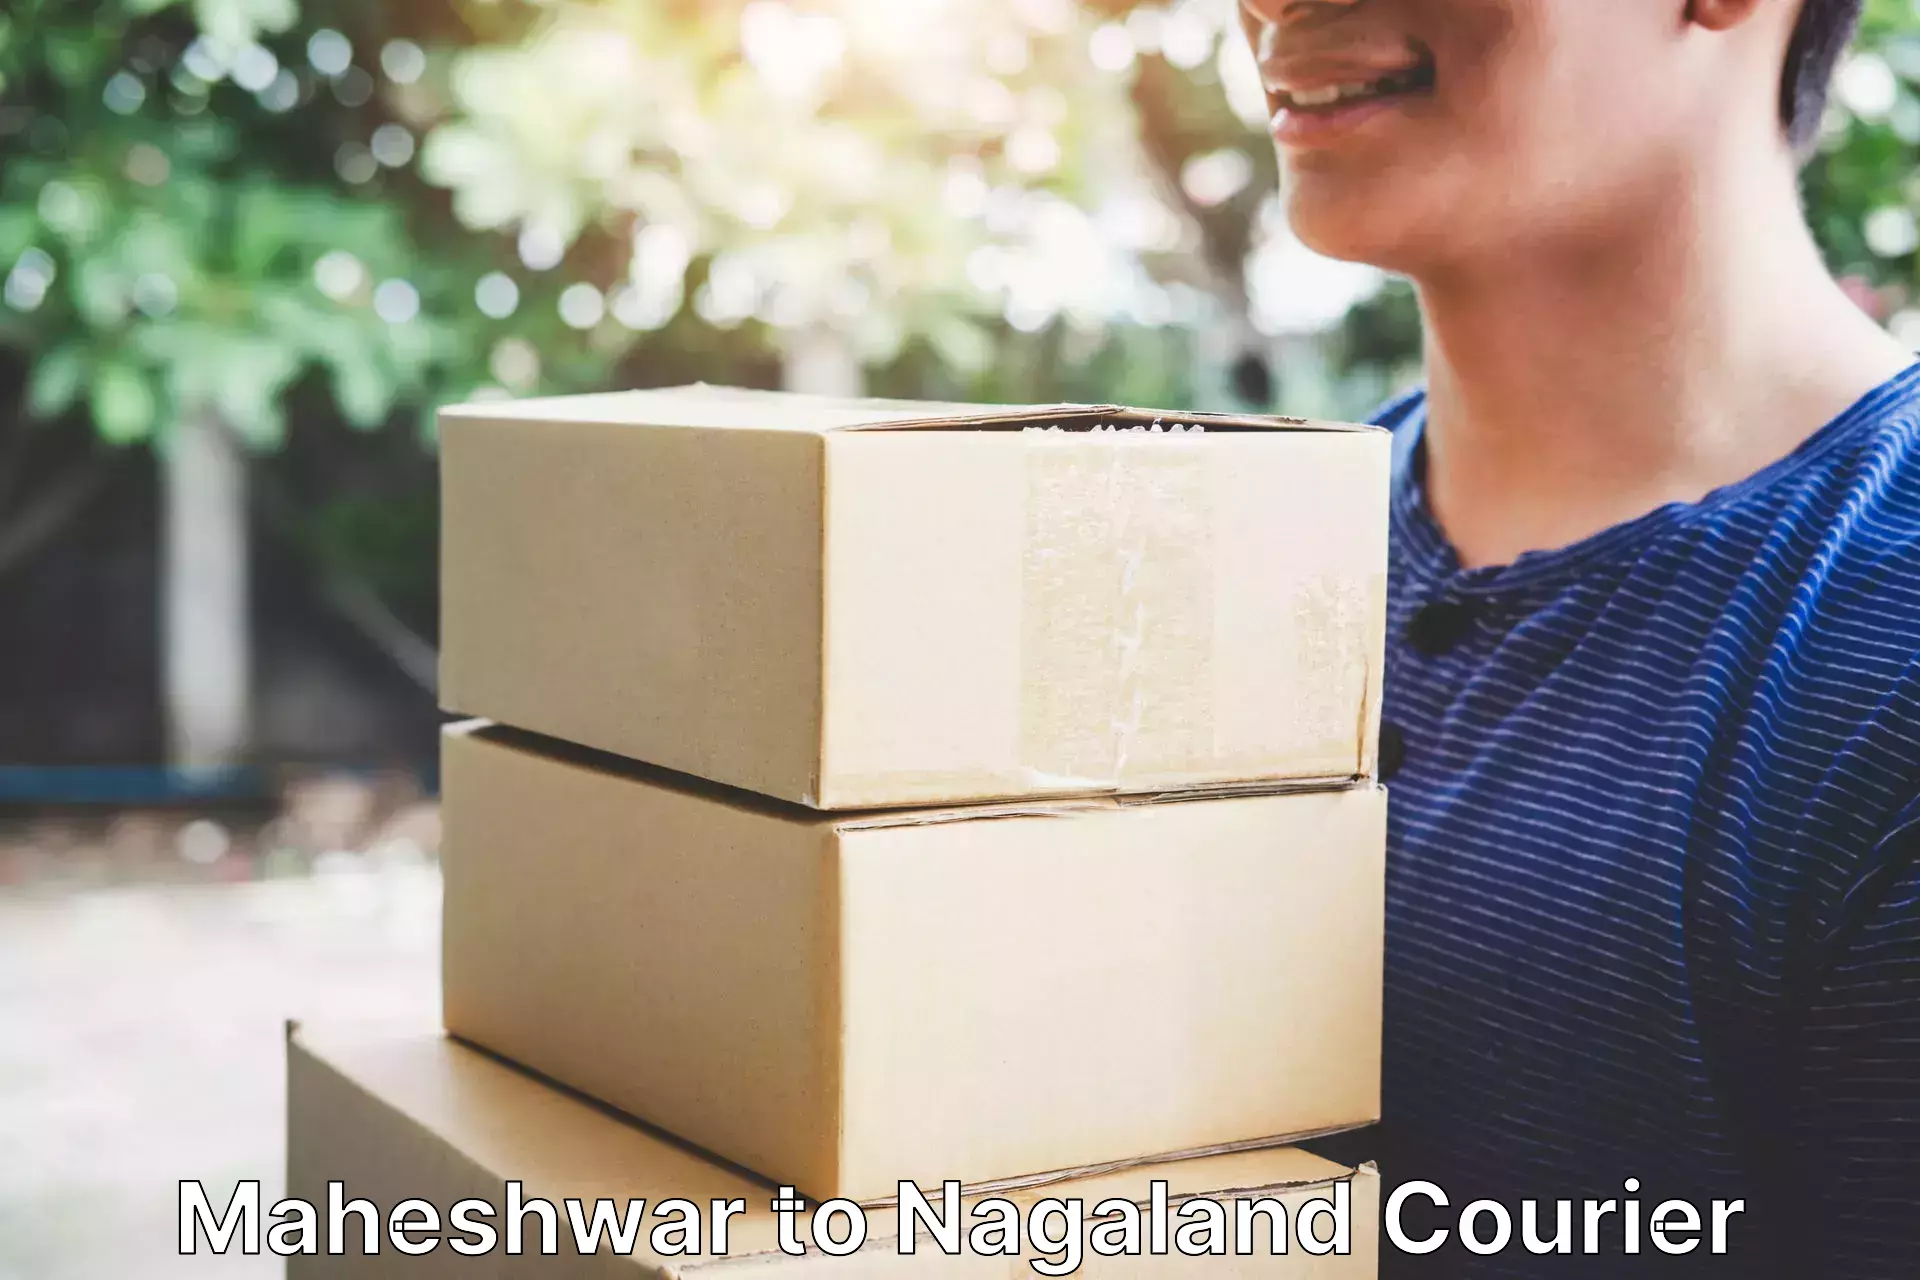 Reliable delivery network Maheshwar to Nagaland